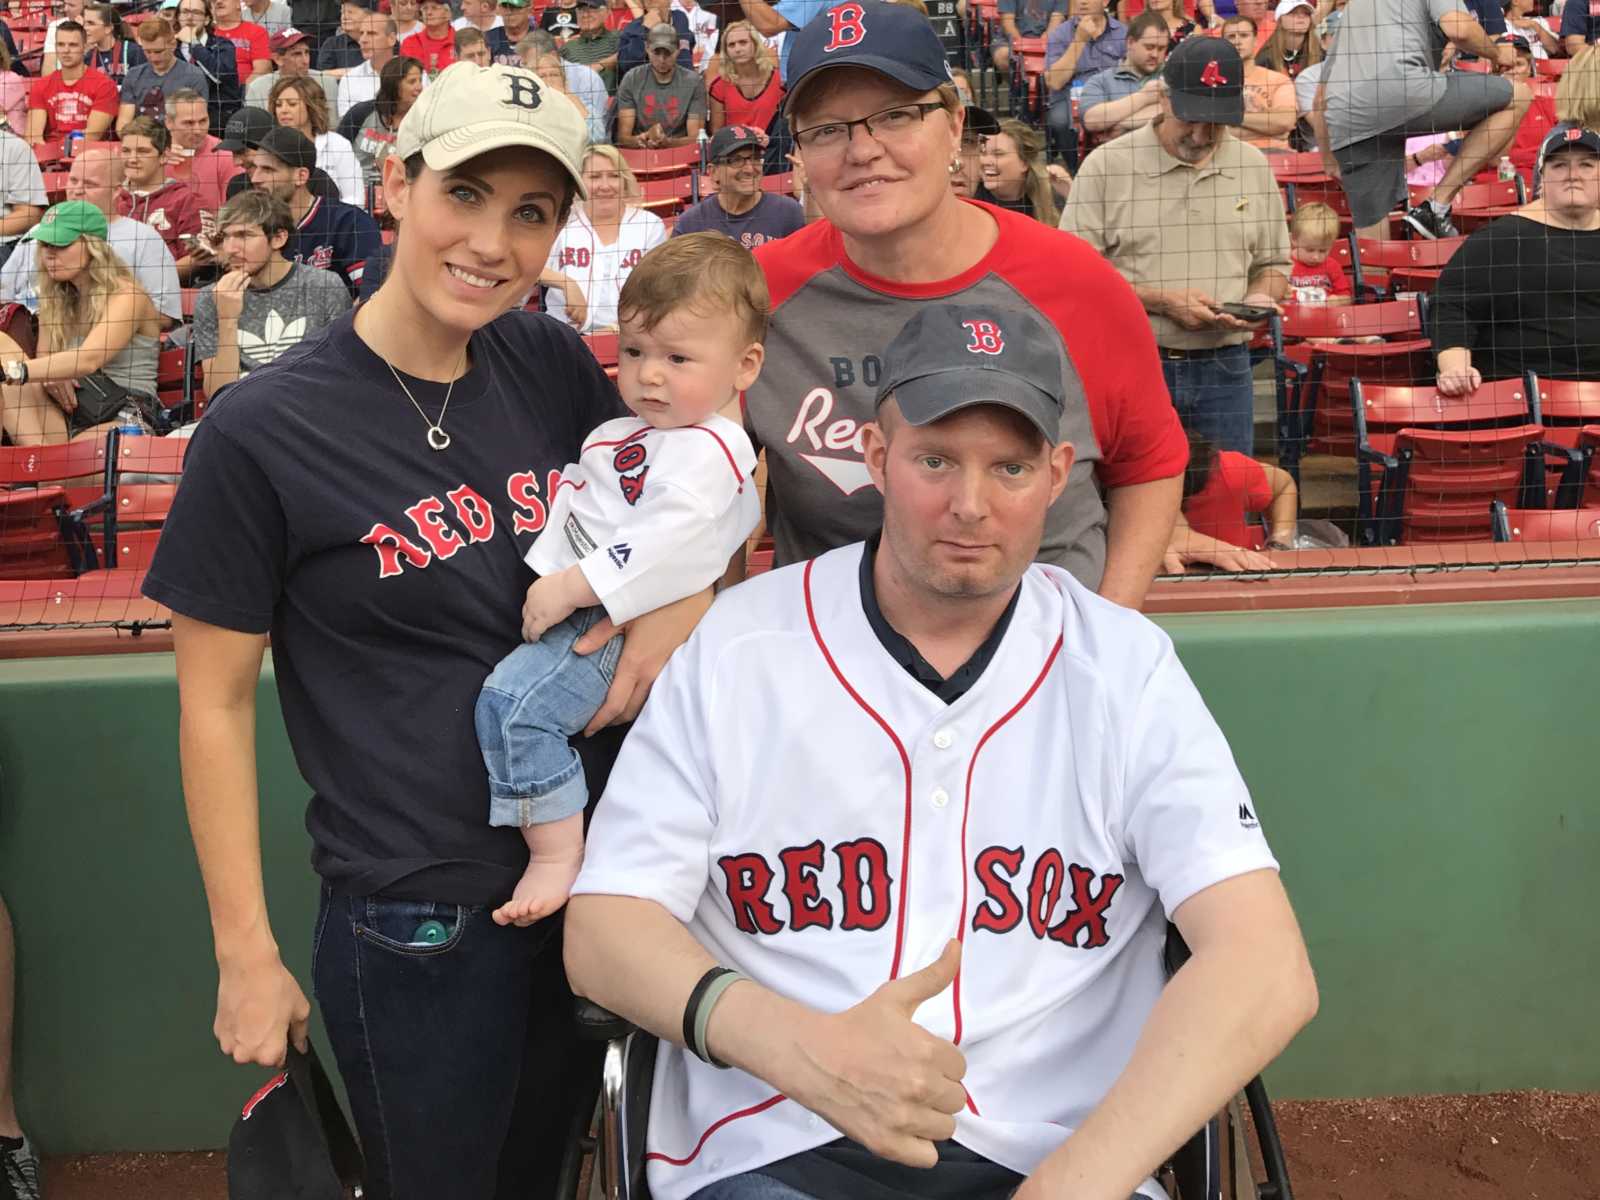 brain cancer patient gives thumbs up on red sox field with wife, son, and mother behind him